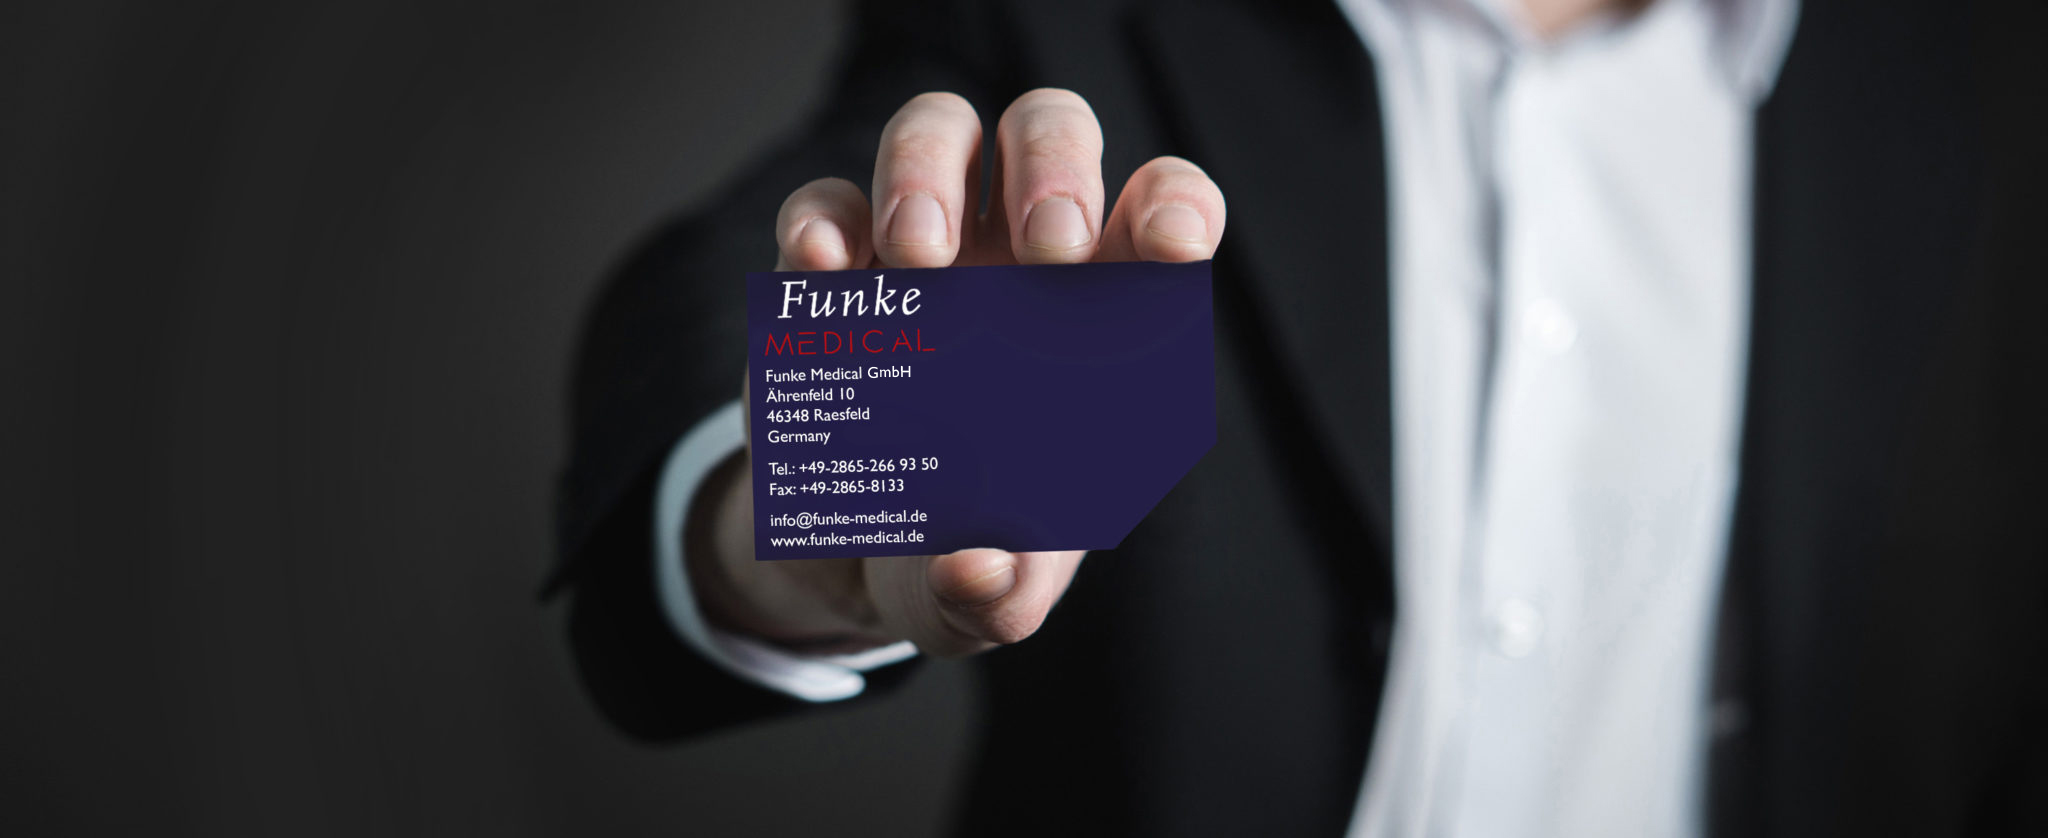 Man in suit holds a Funke Medical business card into the camera